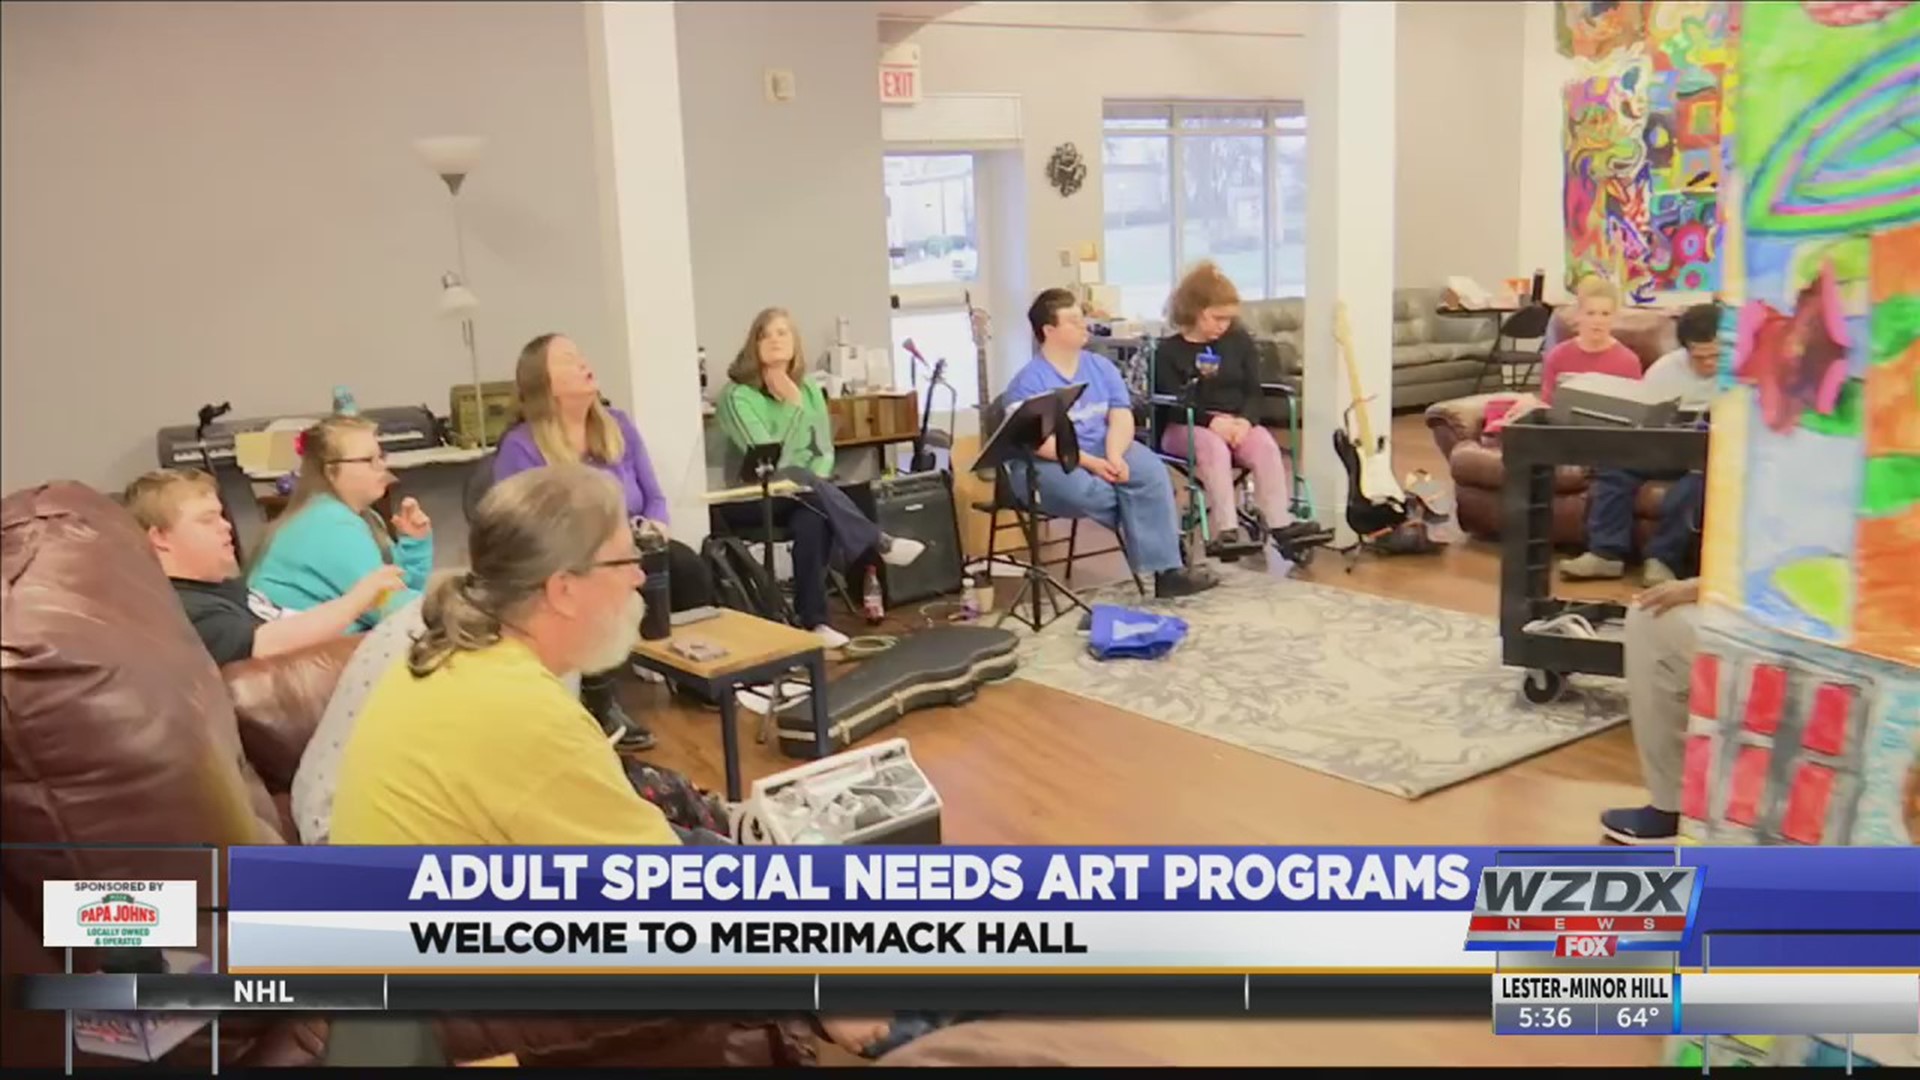 Merrimack Hall is a performing arts center in Huntsville that provides art, music, and theater classes for children and adults with special needs.